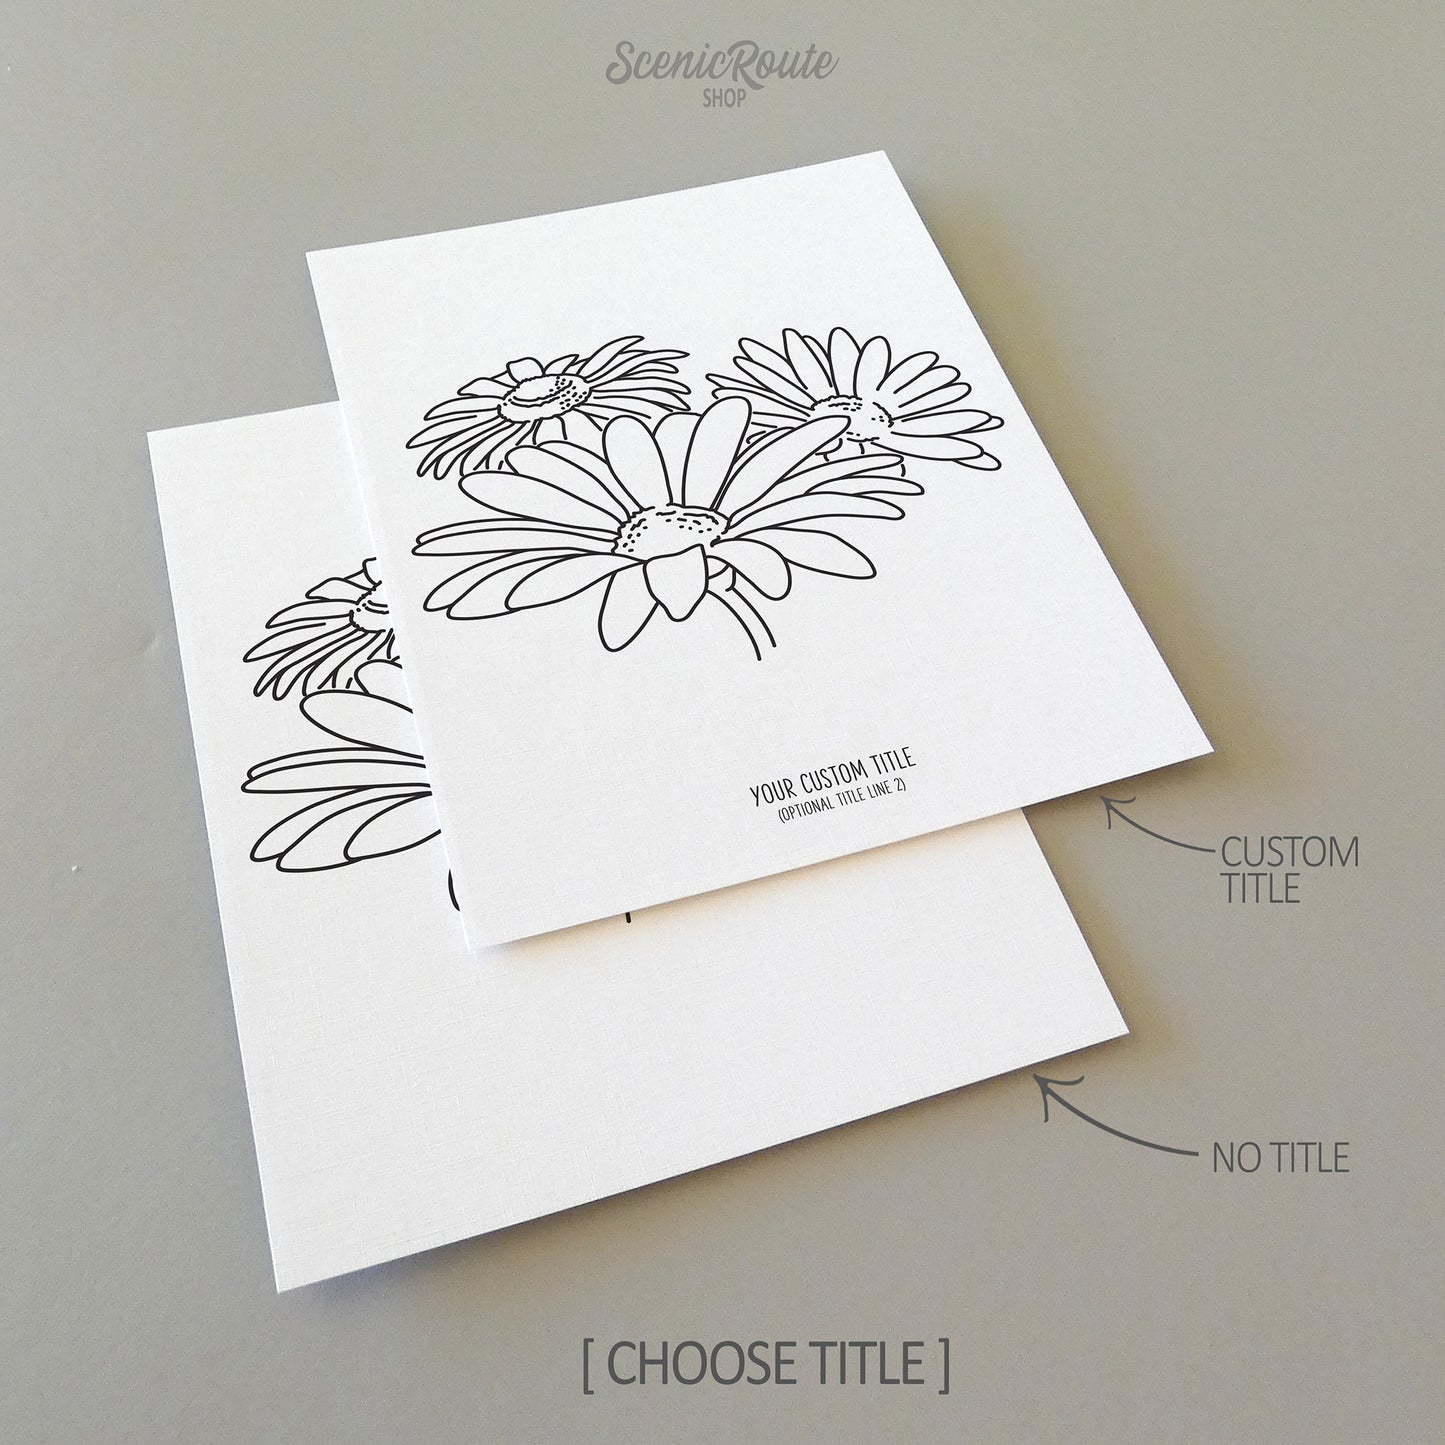 Two line art drawings of Daisy Flowers on white linen paper with a gray background.  The pieces are shown with “No Title” and “Custom Title” options for the available art print options.